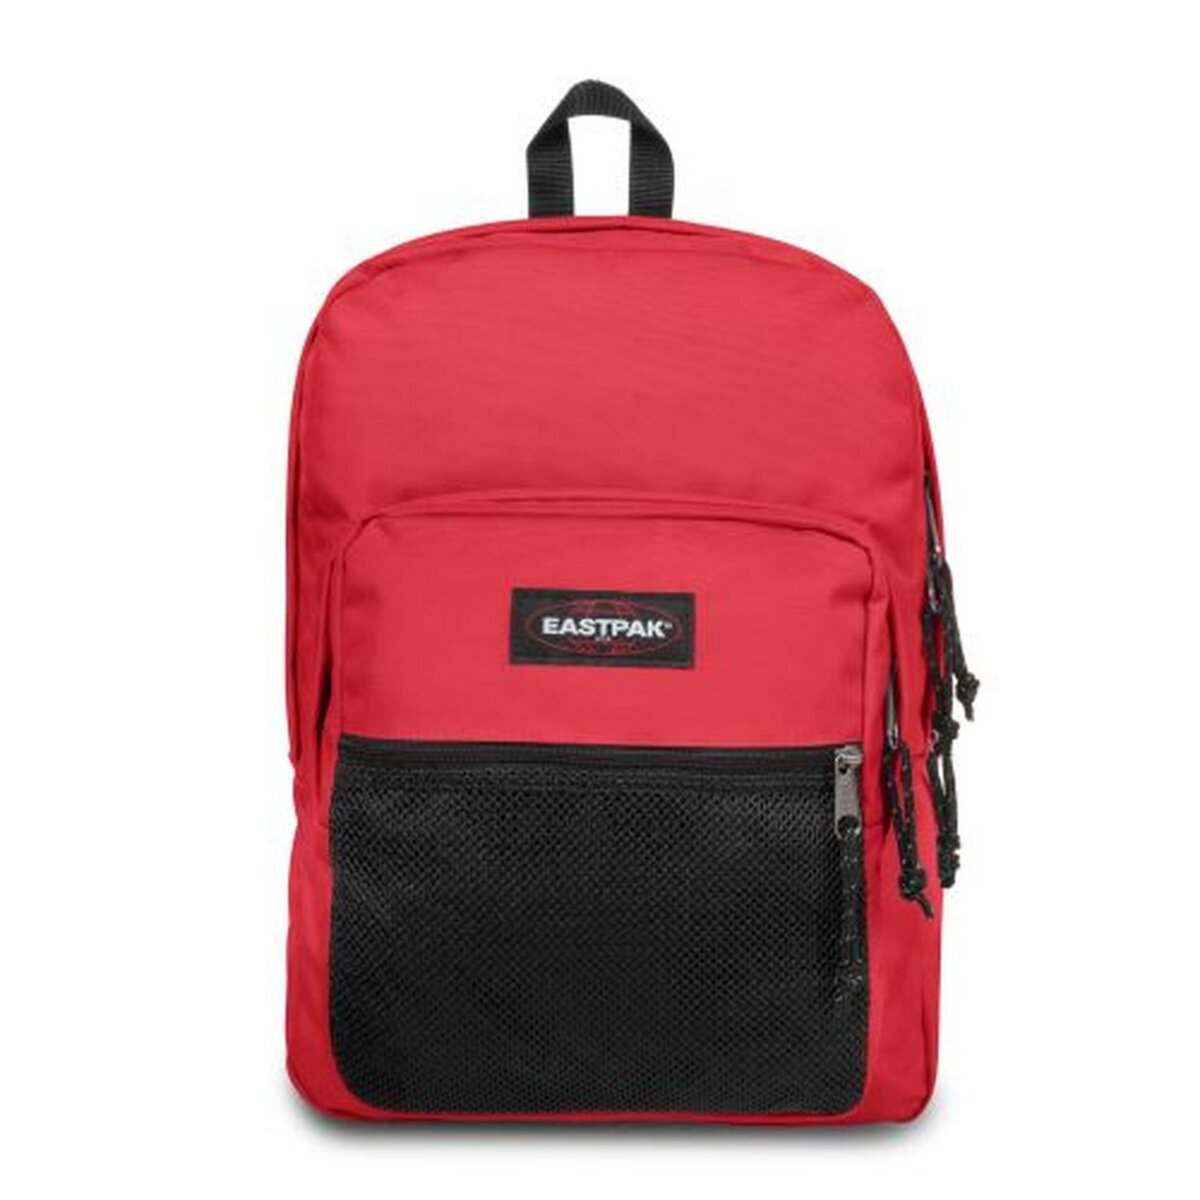 EASTPAK Sac à dos PINNACLE riskly red 2 compartiments